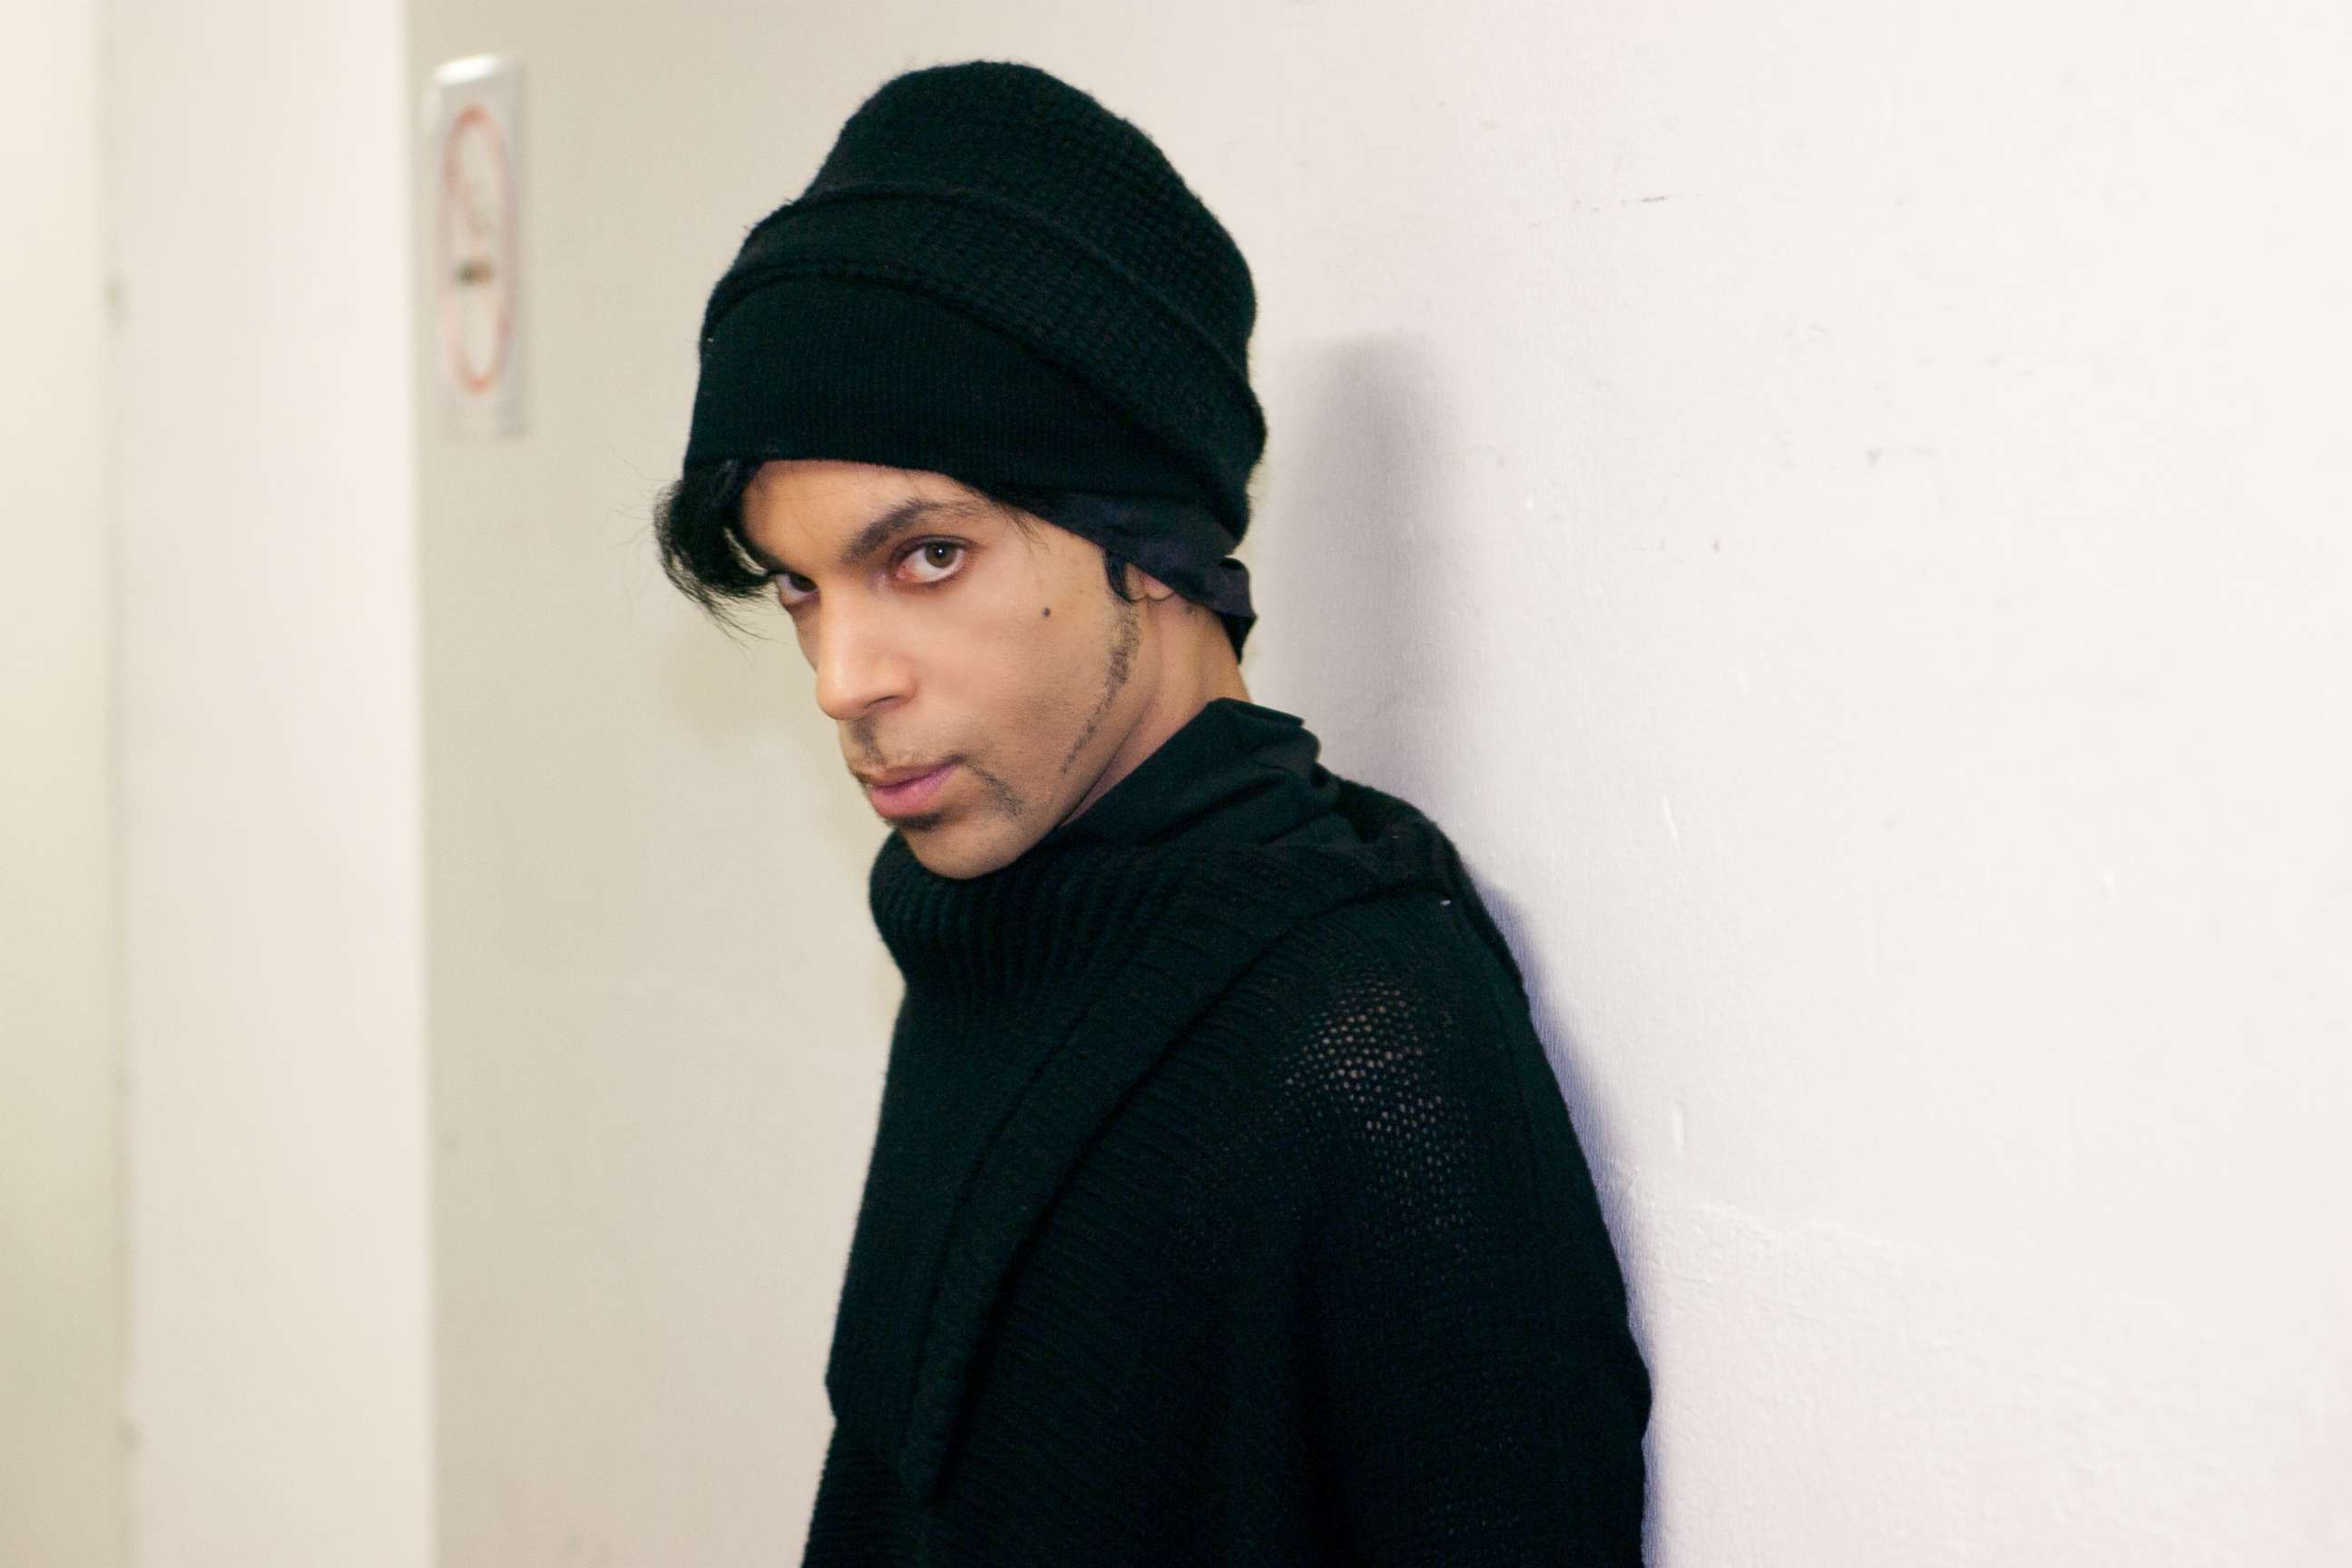 PHOTO: Prince is photographed backstage in Europe on his "One Nite Alone Tour" in 2002.